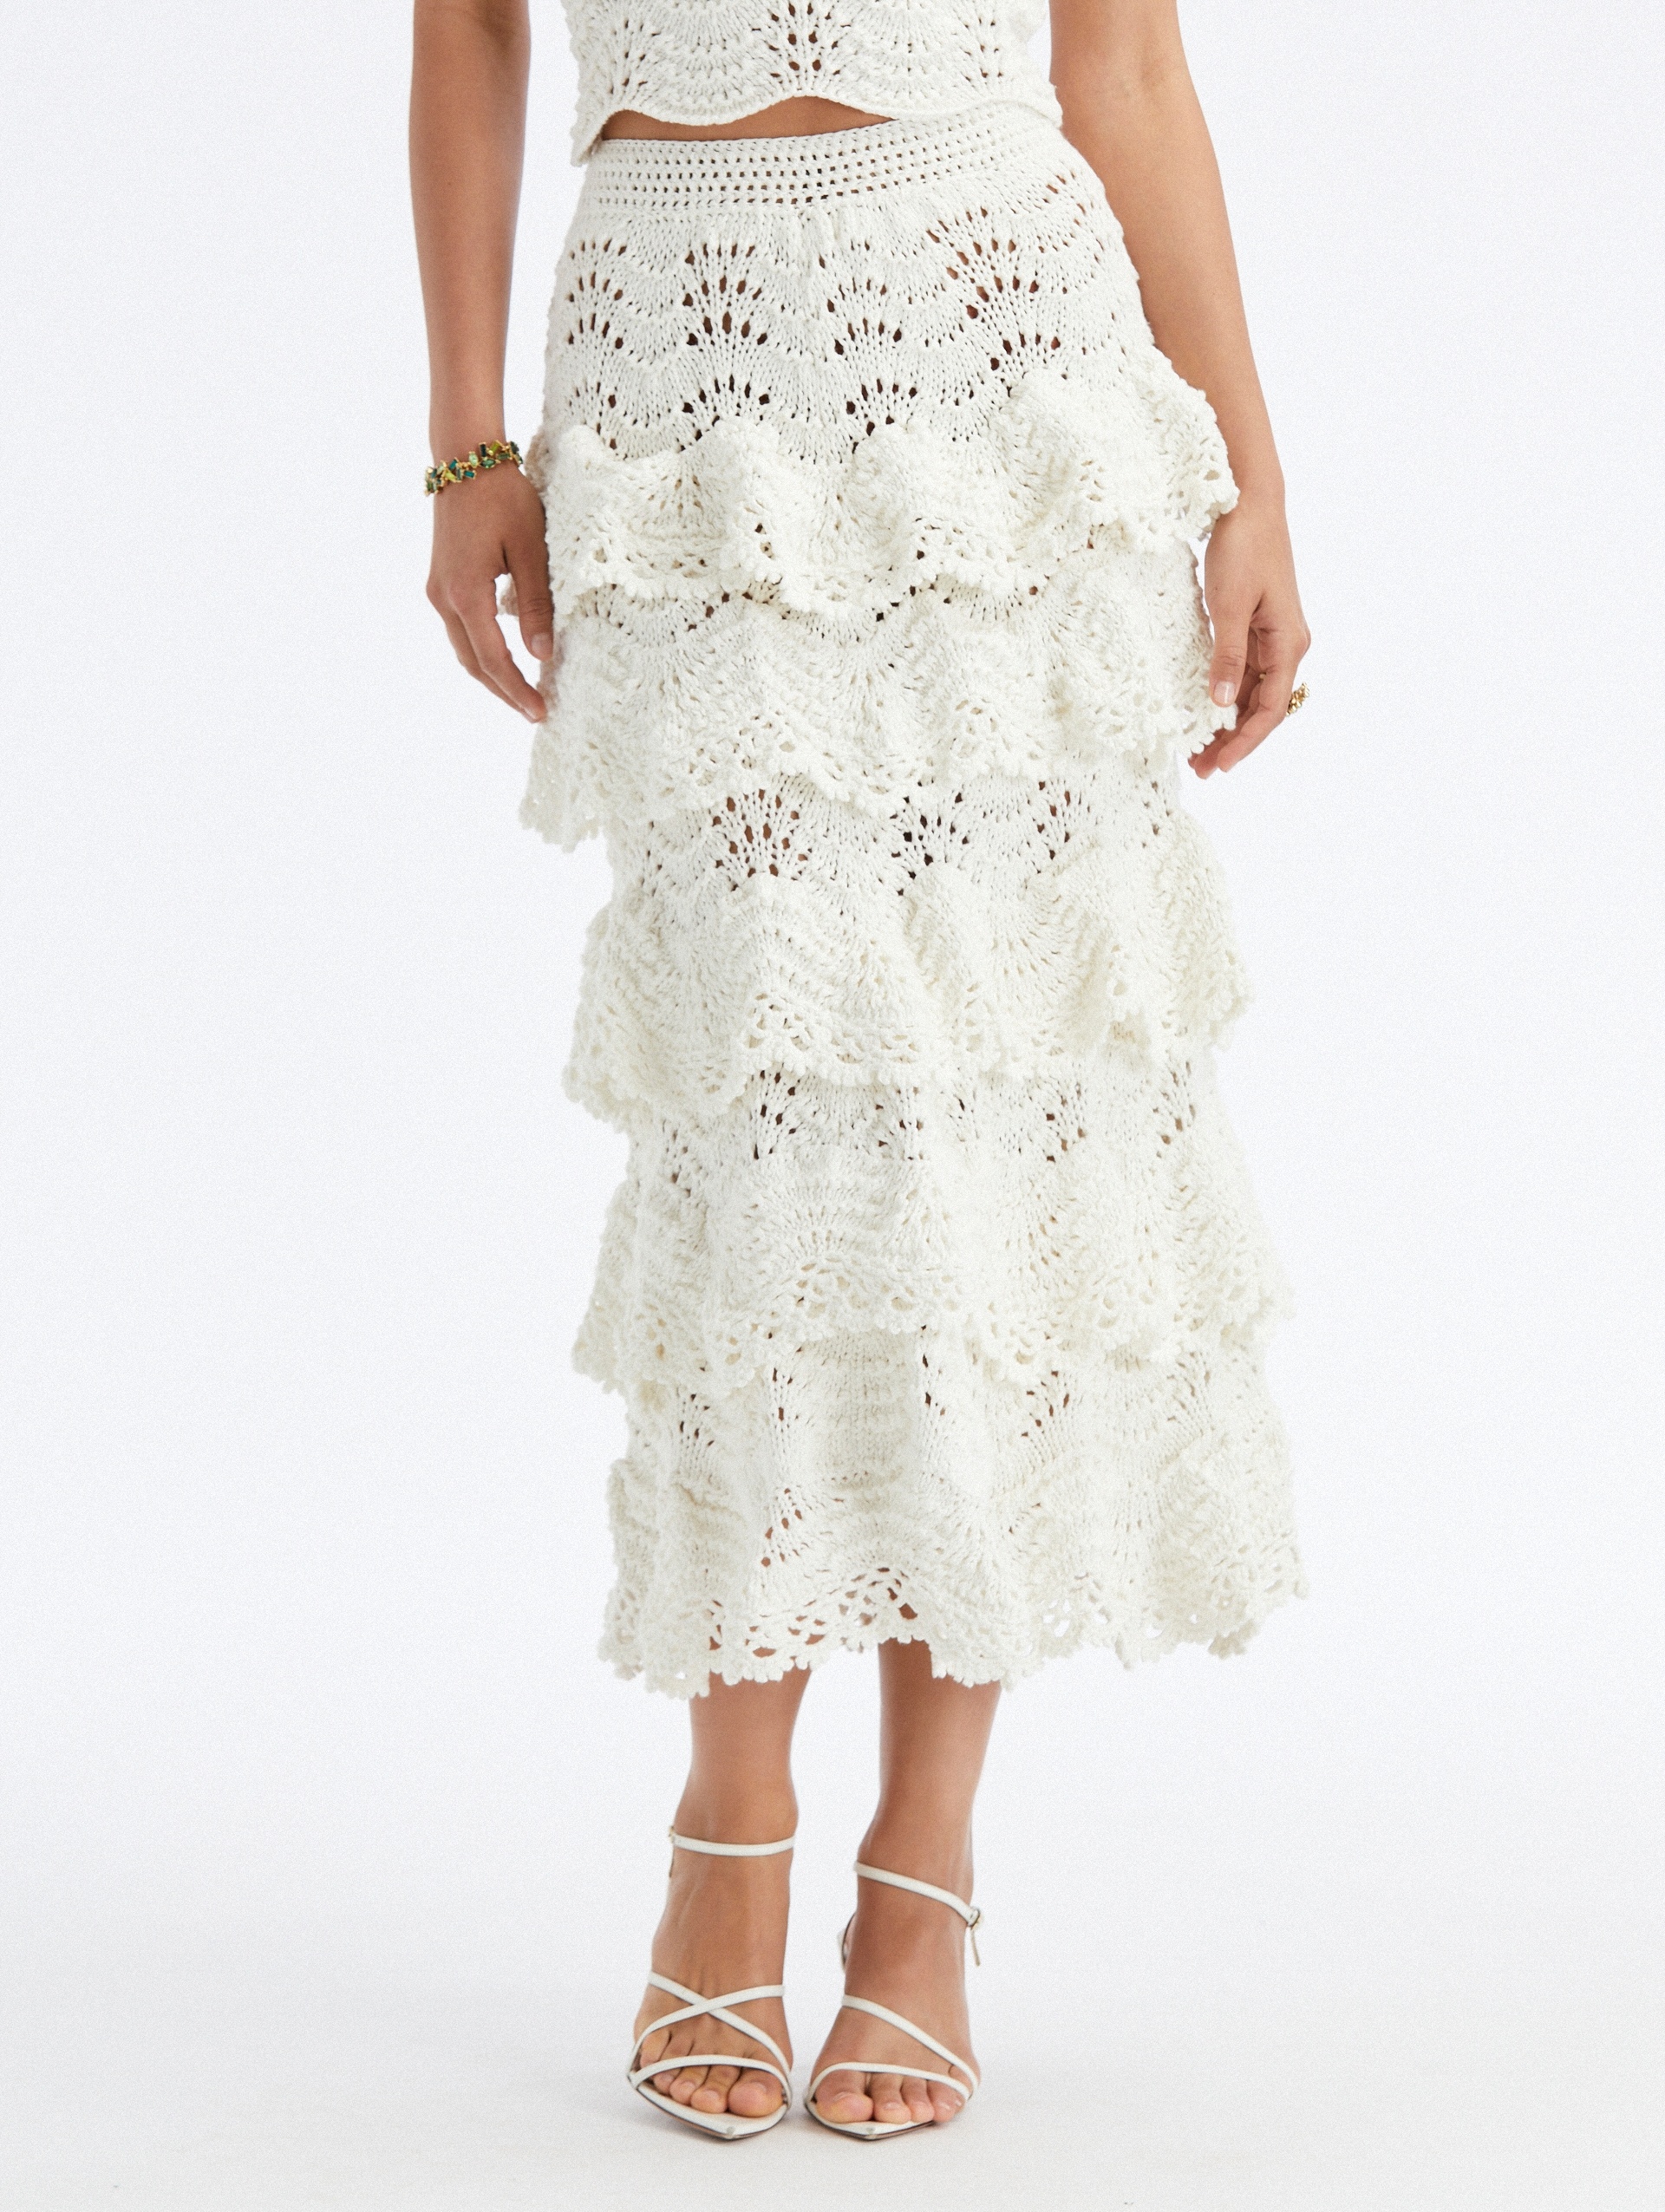 HAND CROCHETED SCALLOP TIERED SKIRT - 3